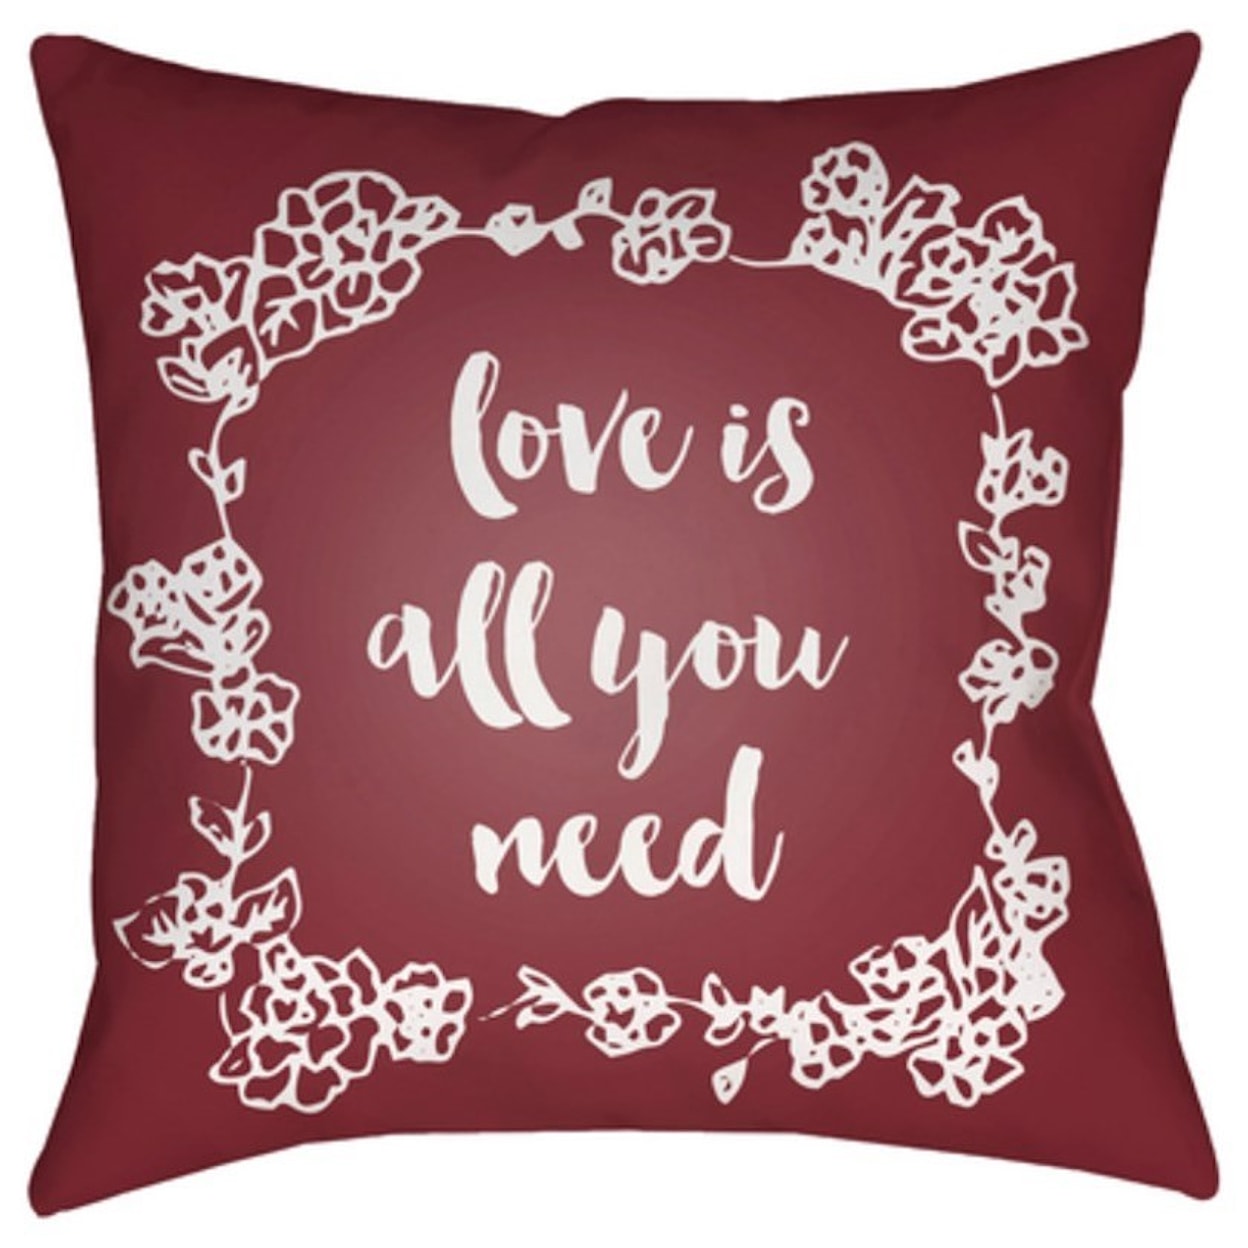 Surya Rugs Love All You Need Pillow